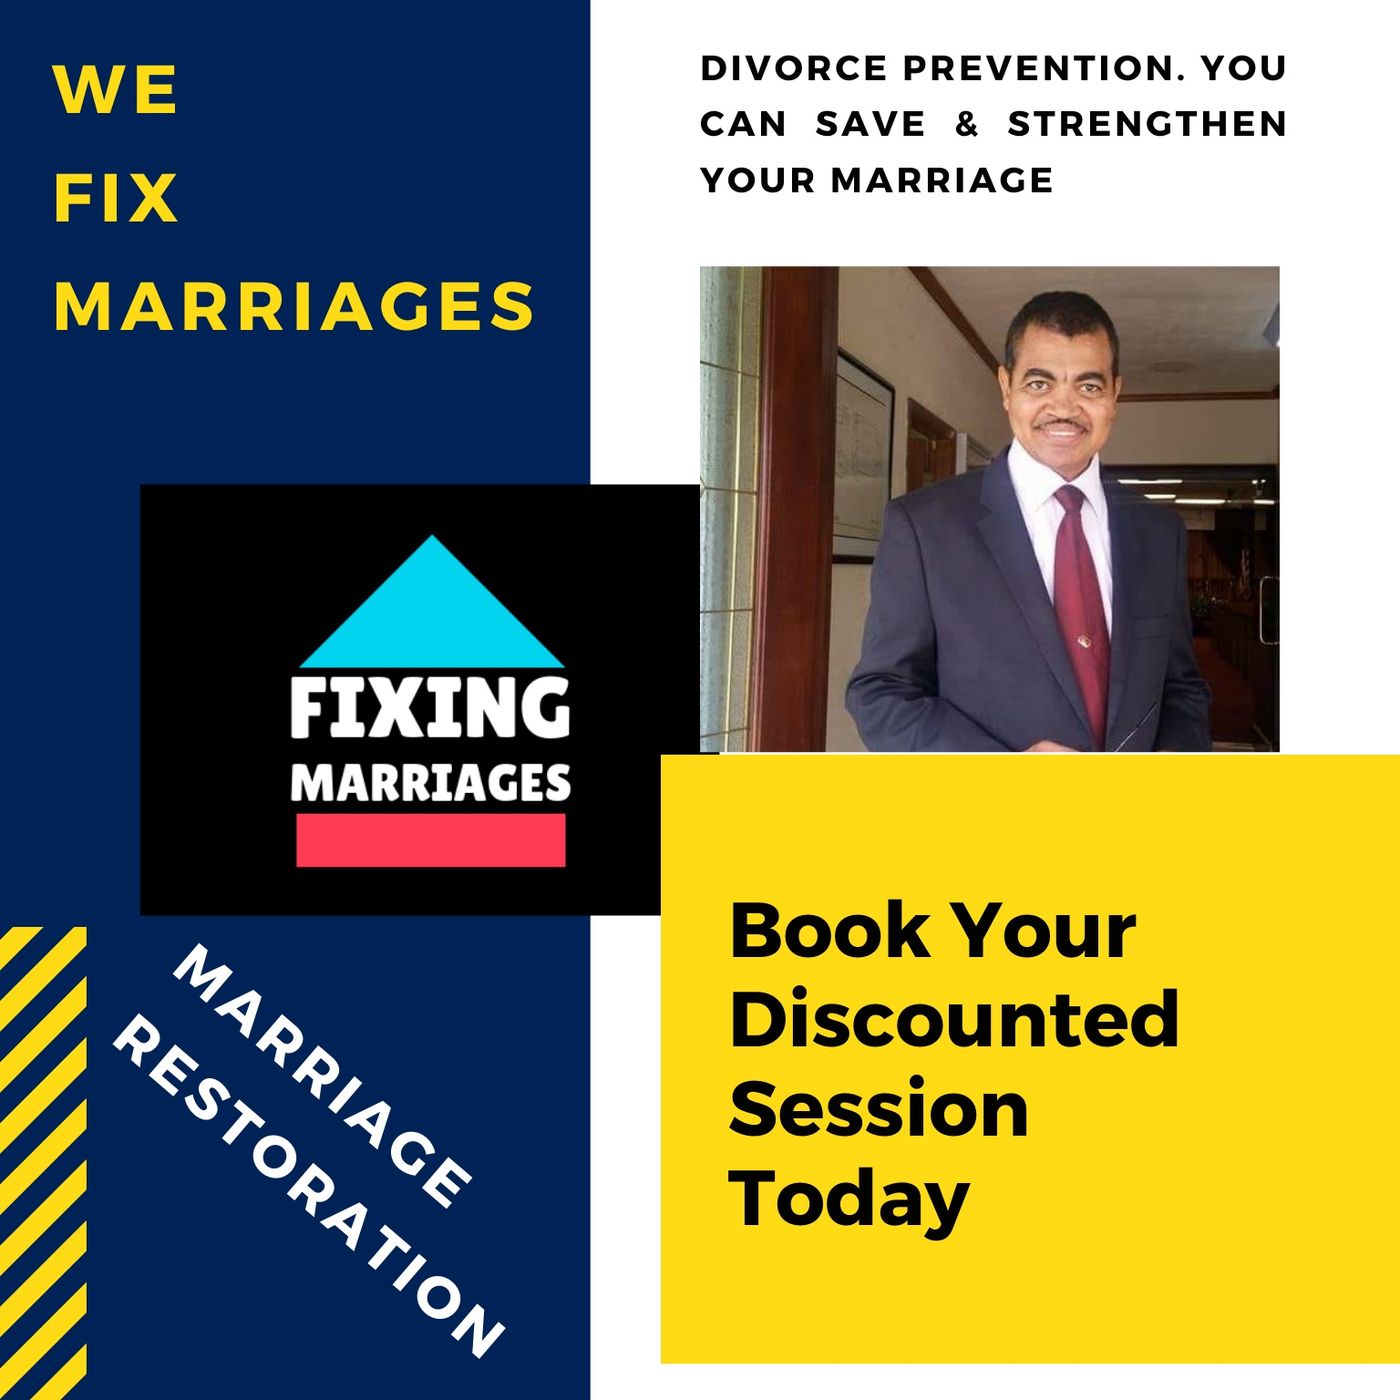 Episode 4 - What's Wrong With Marriage? Fixing Marriages : Strengthen Your Relationship.